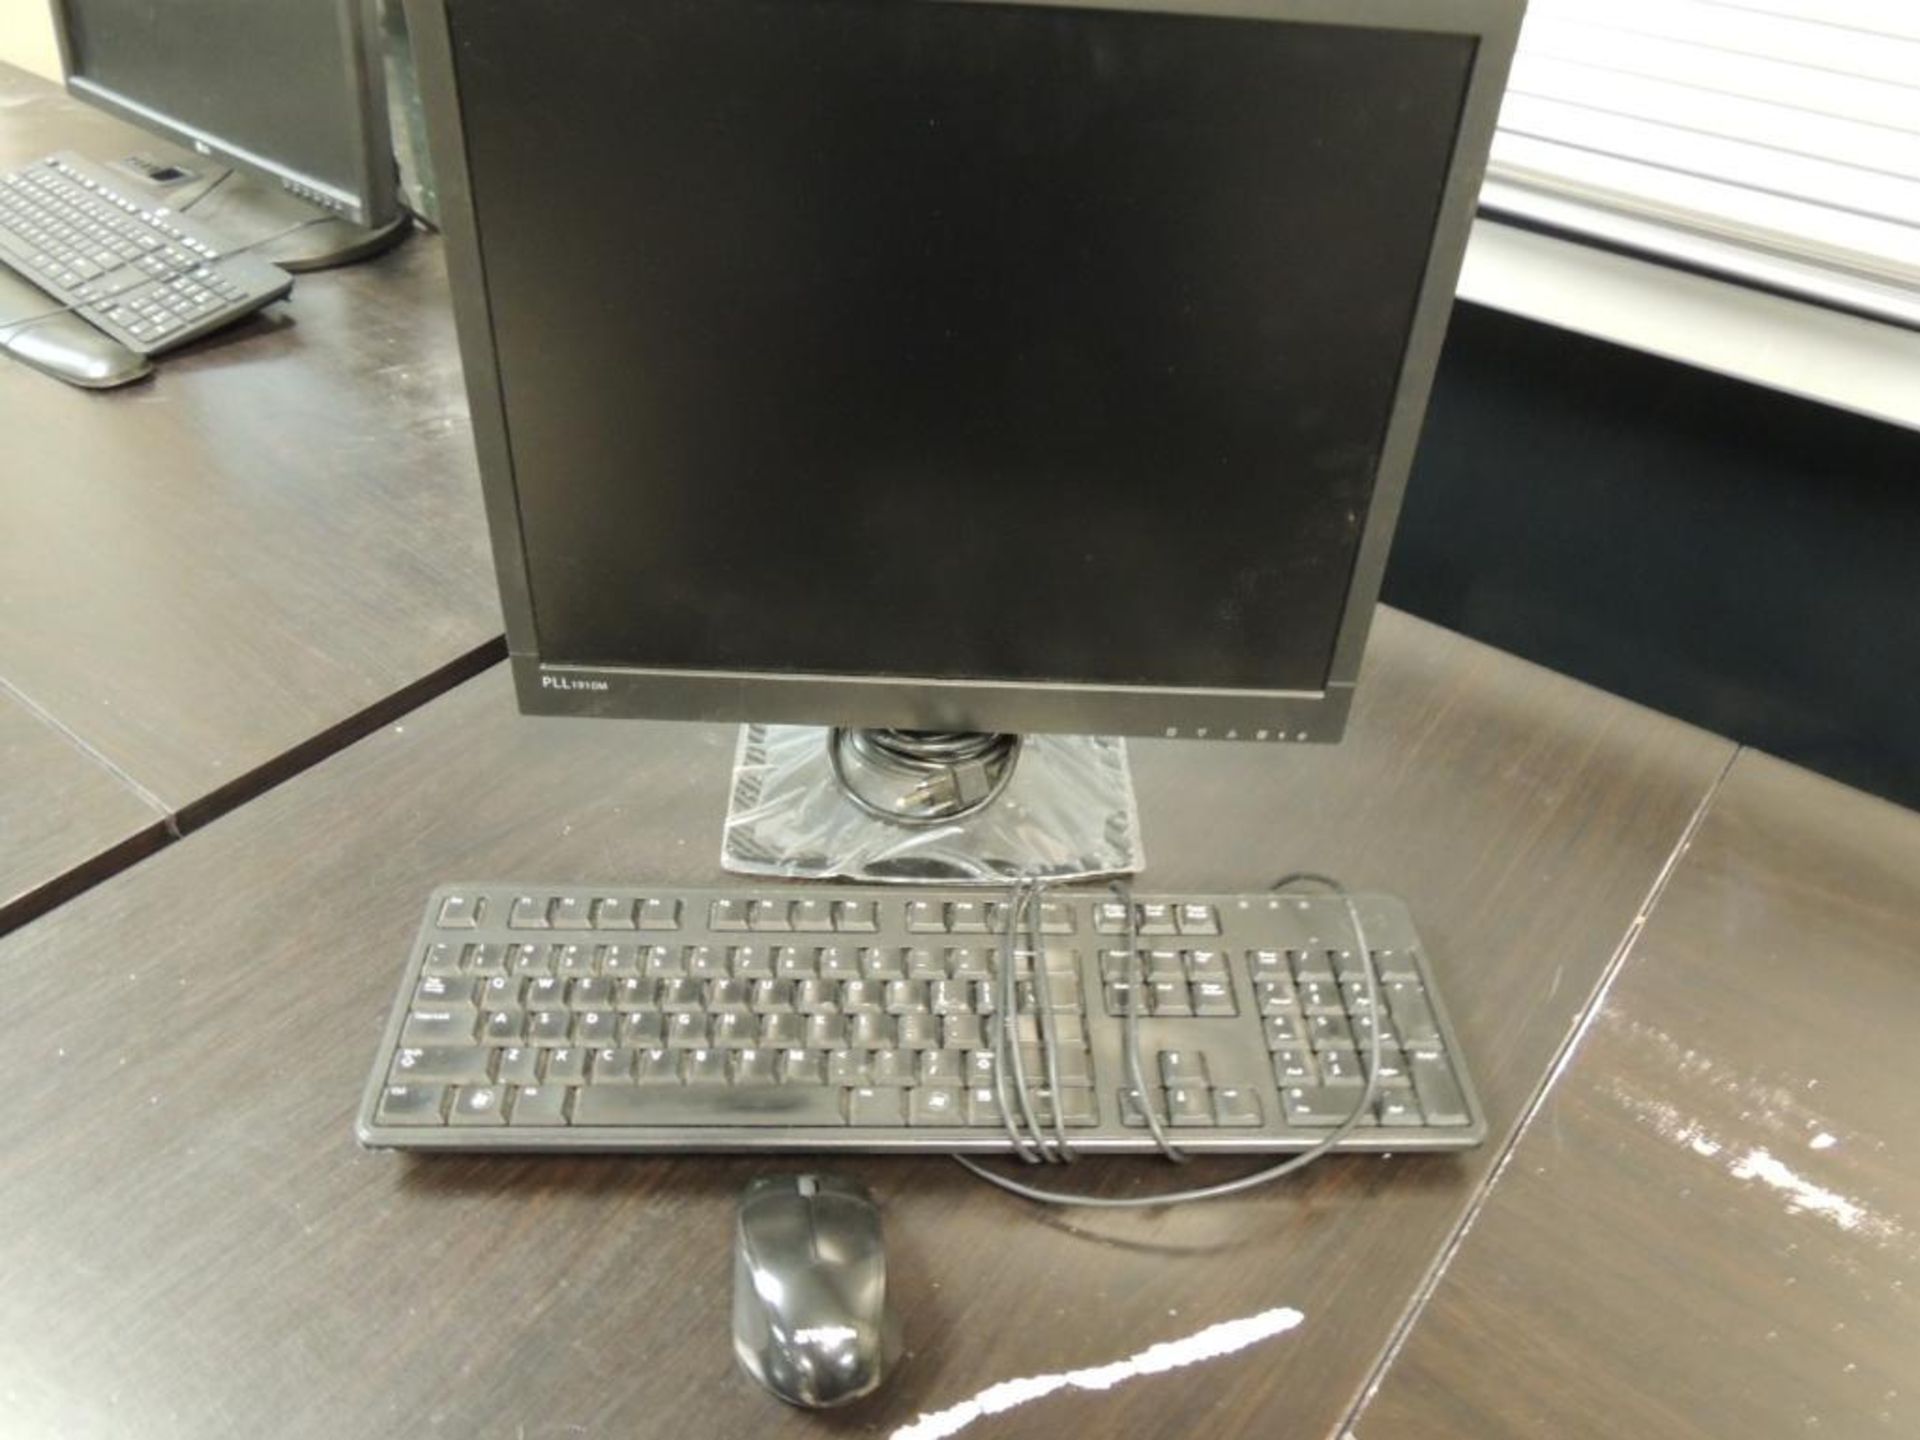 LOT: Monitors including (1) Planar, (1) LG, with Keyboards & Mouses - Image 2 of 2